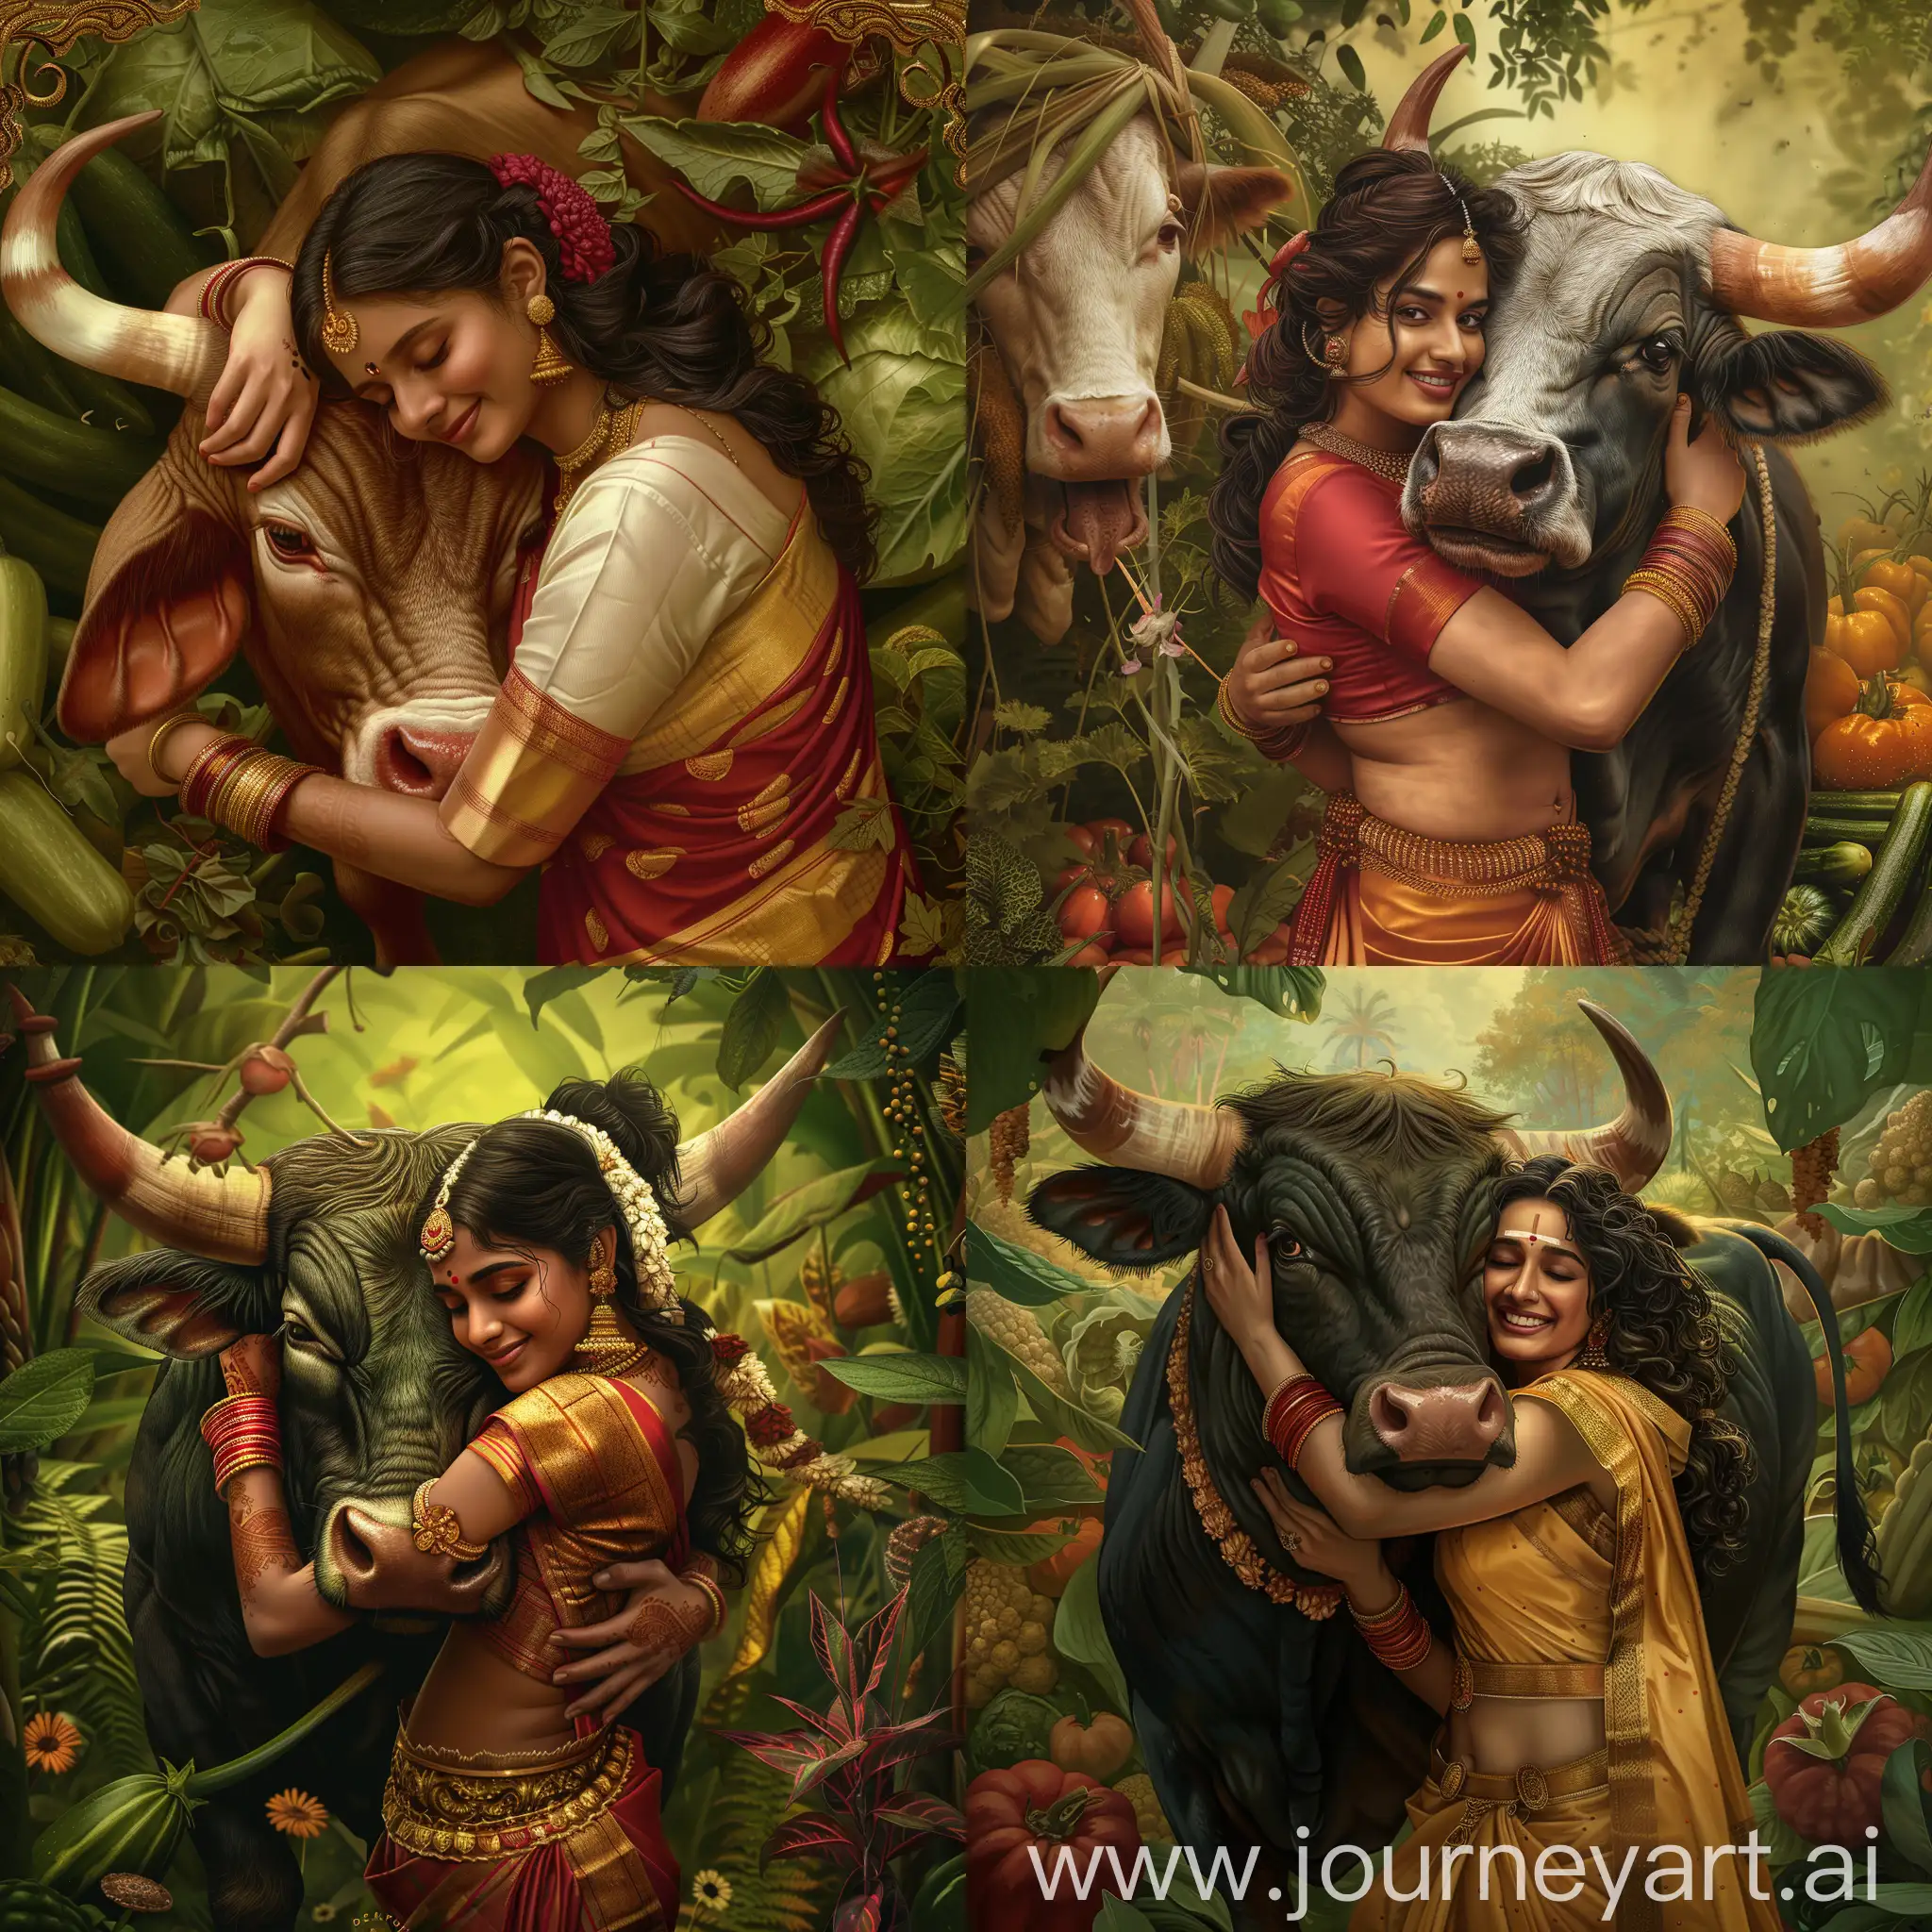 Captivating-Kerala-Malayali-Woman-Embracing-Majestic-Indian-Bull-in-a-Picturesque-Selfie-Scene